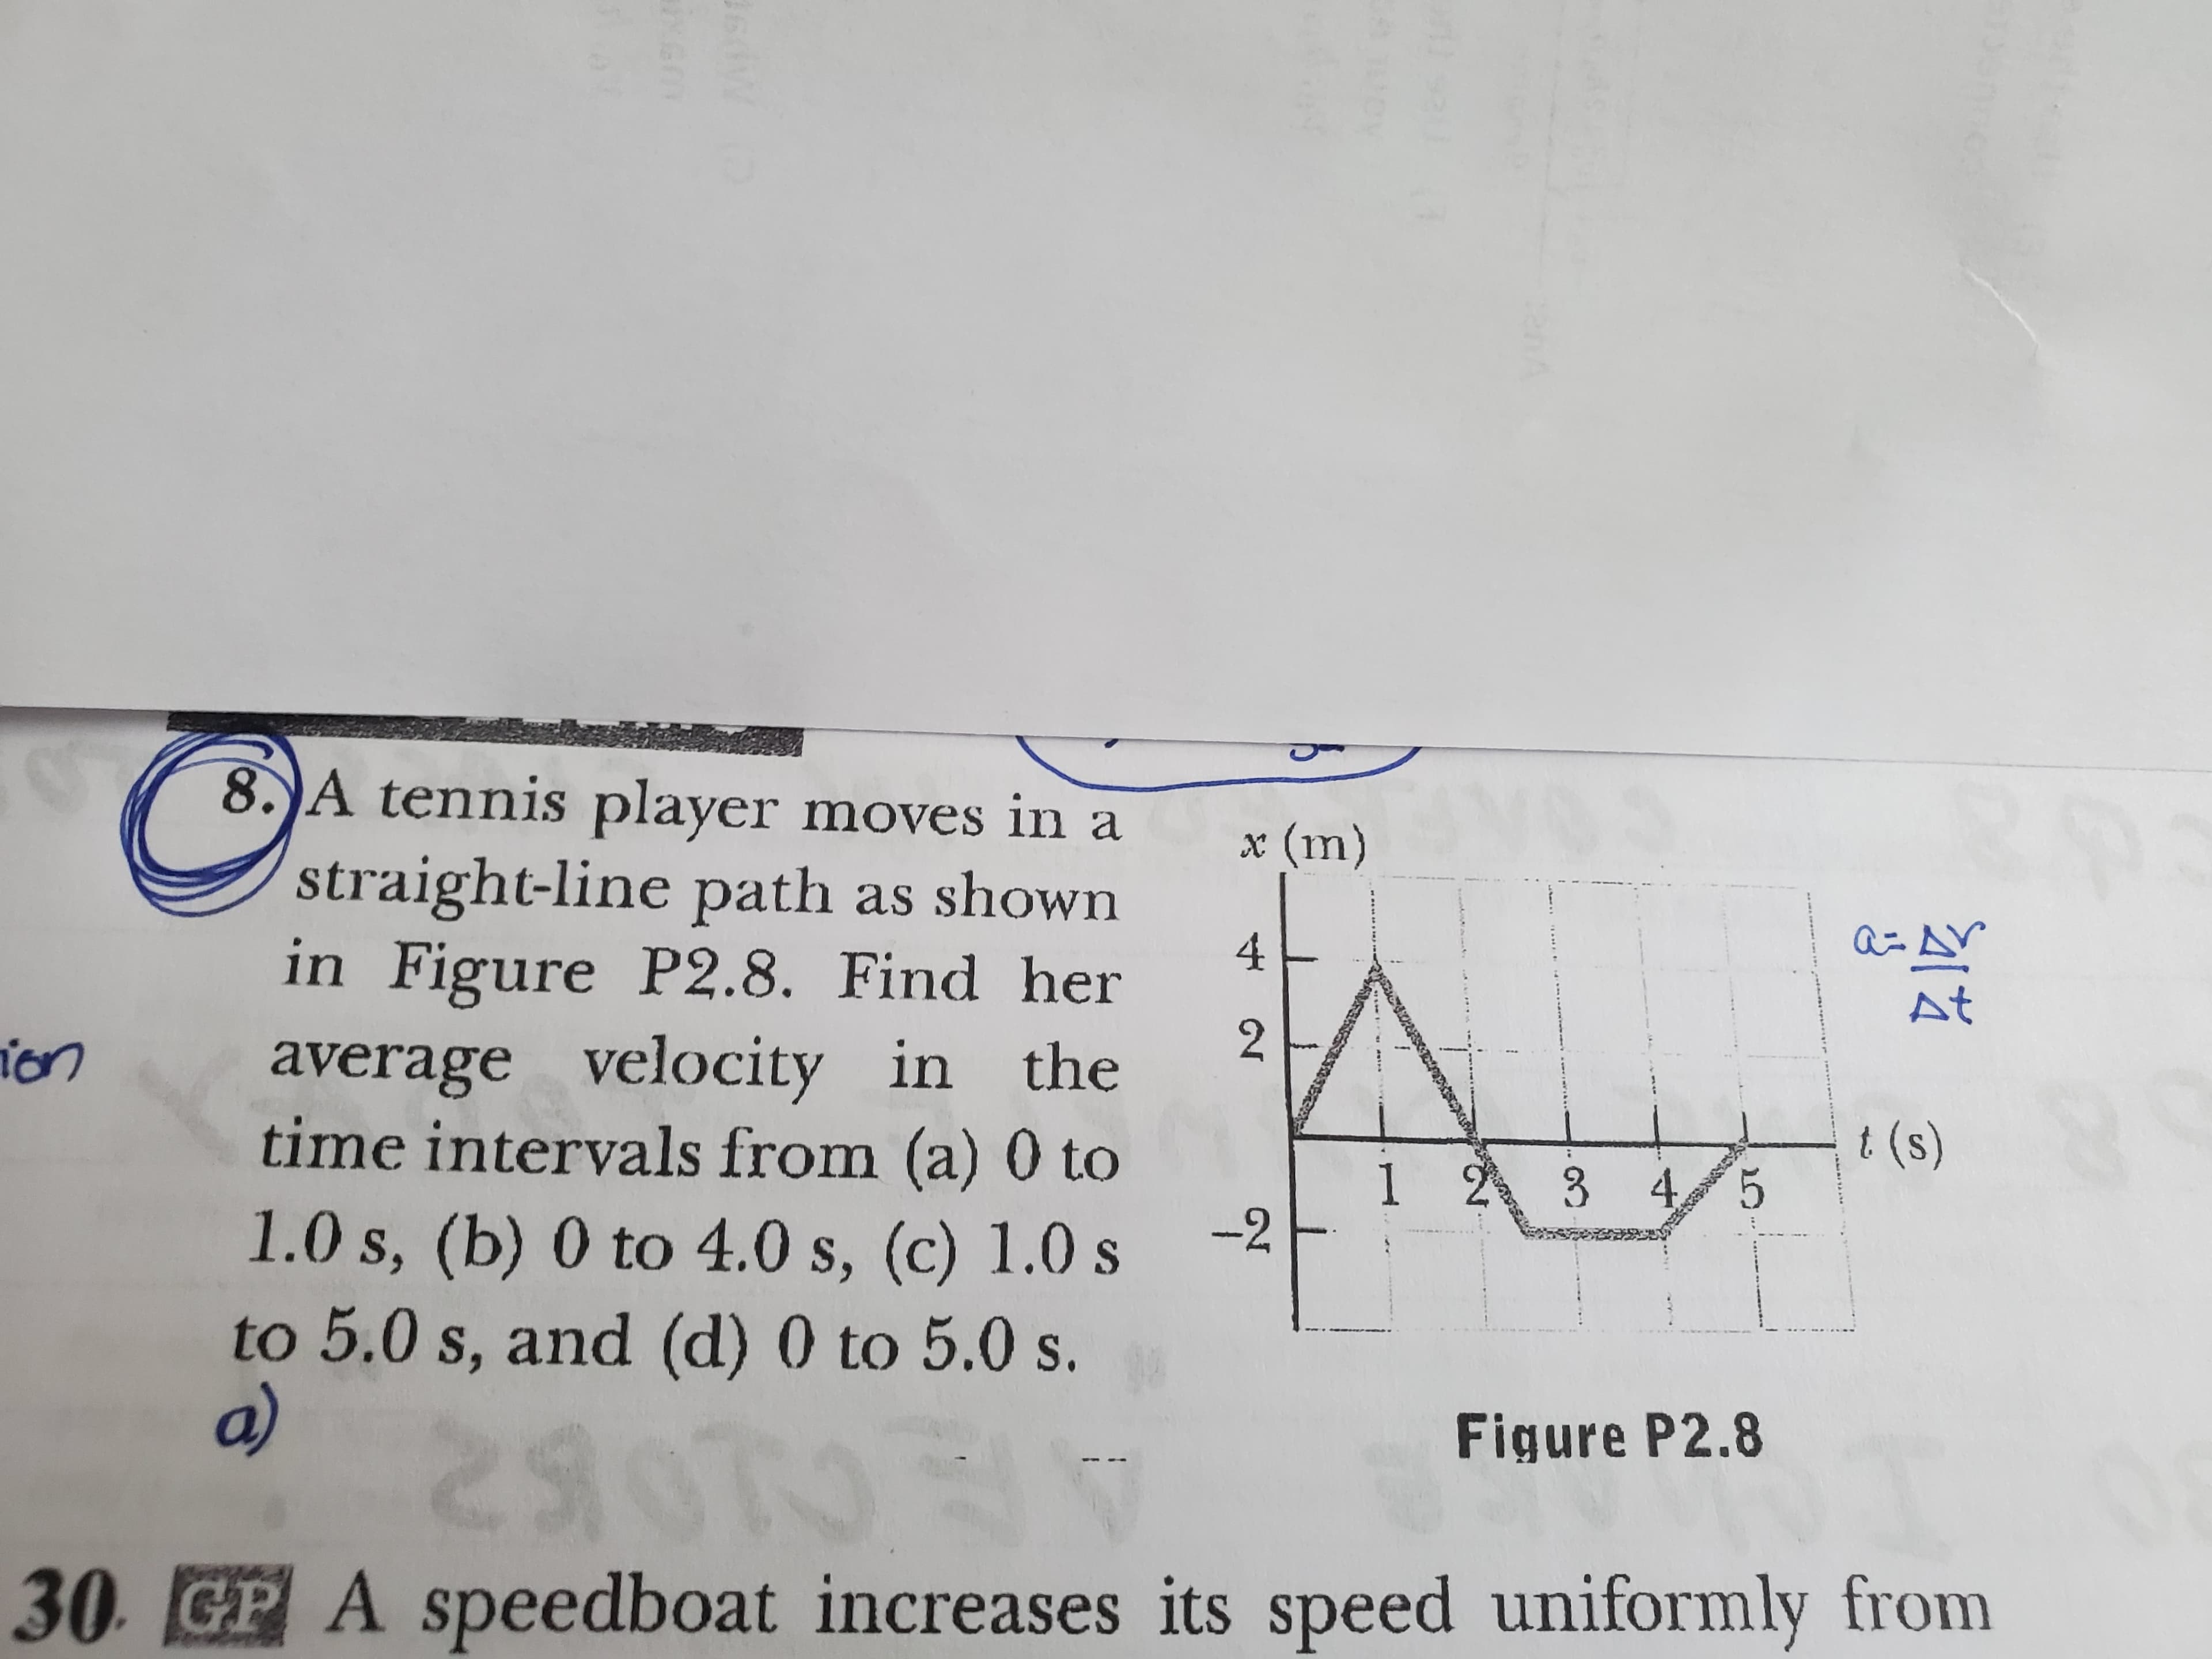 8. A tennis player moves in a
x (m)
straight-line path as shown
in Figure P2.8. Find her
average velocity in the
time intervals from (a) 0 to
At
t (s)
1 2
3.
4/5
-2
1.0 s, (b) 0 to 4.0 s, (c) 1.0 s
to 5.0 s, and (d) 0 to 5.0 s.
a)
Figure P2.8
